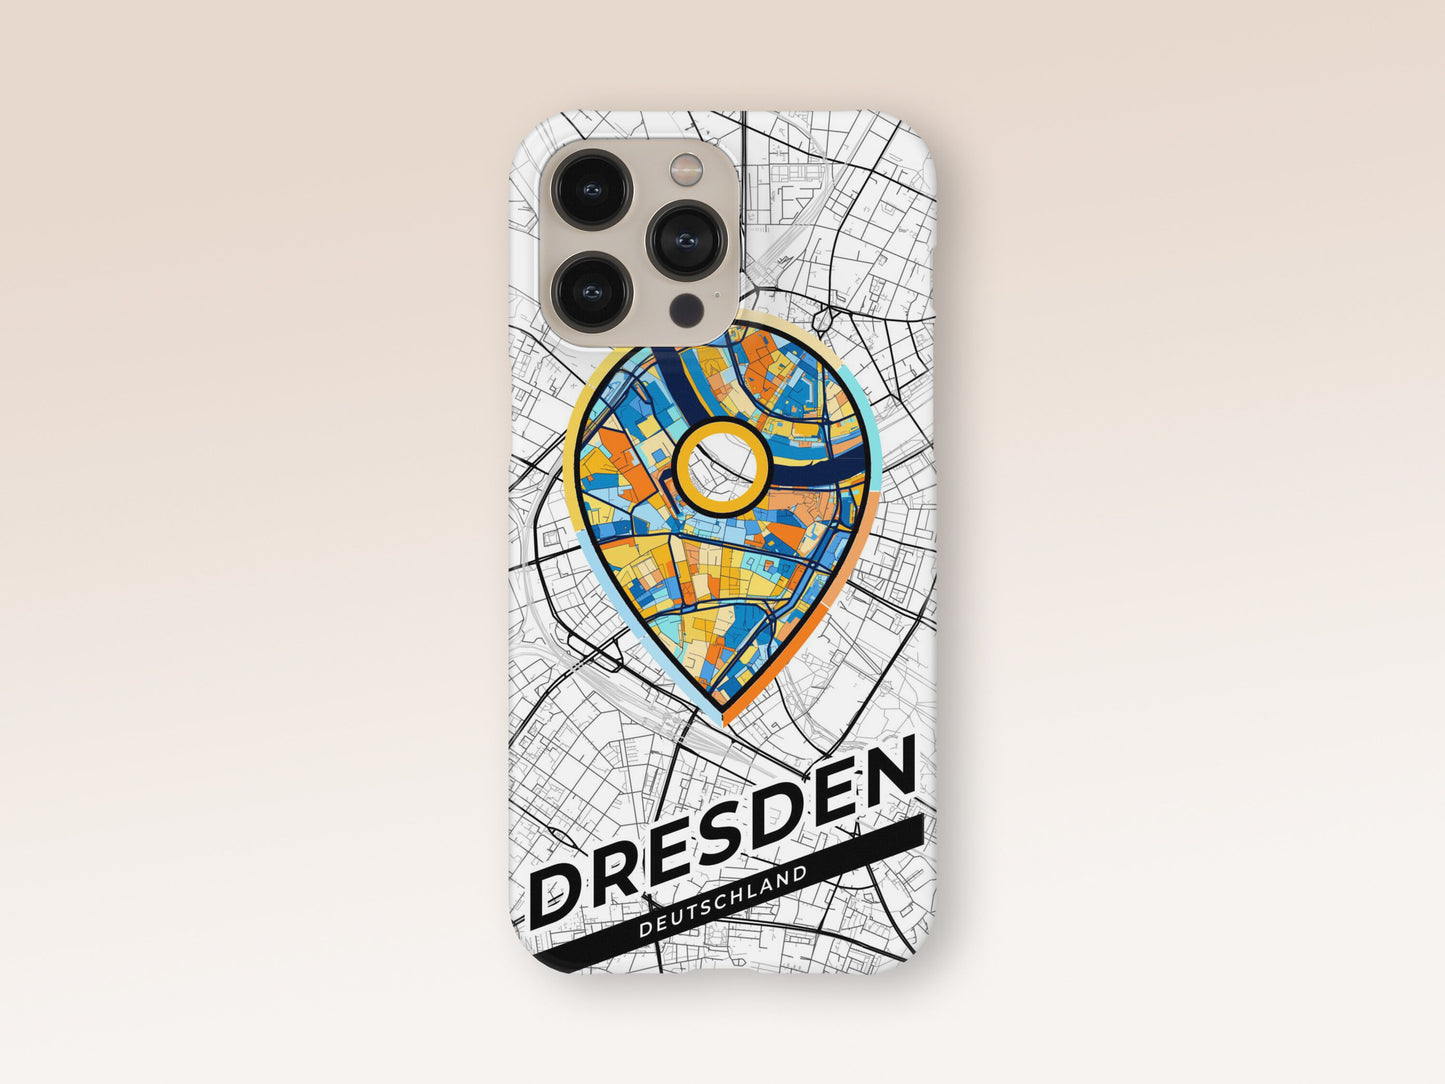 Dresden Deutschland slim phone case with colorful icon. Birthday, wedding or housewarming gift. Couple match cases. 1